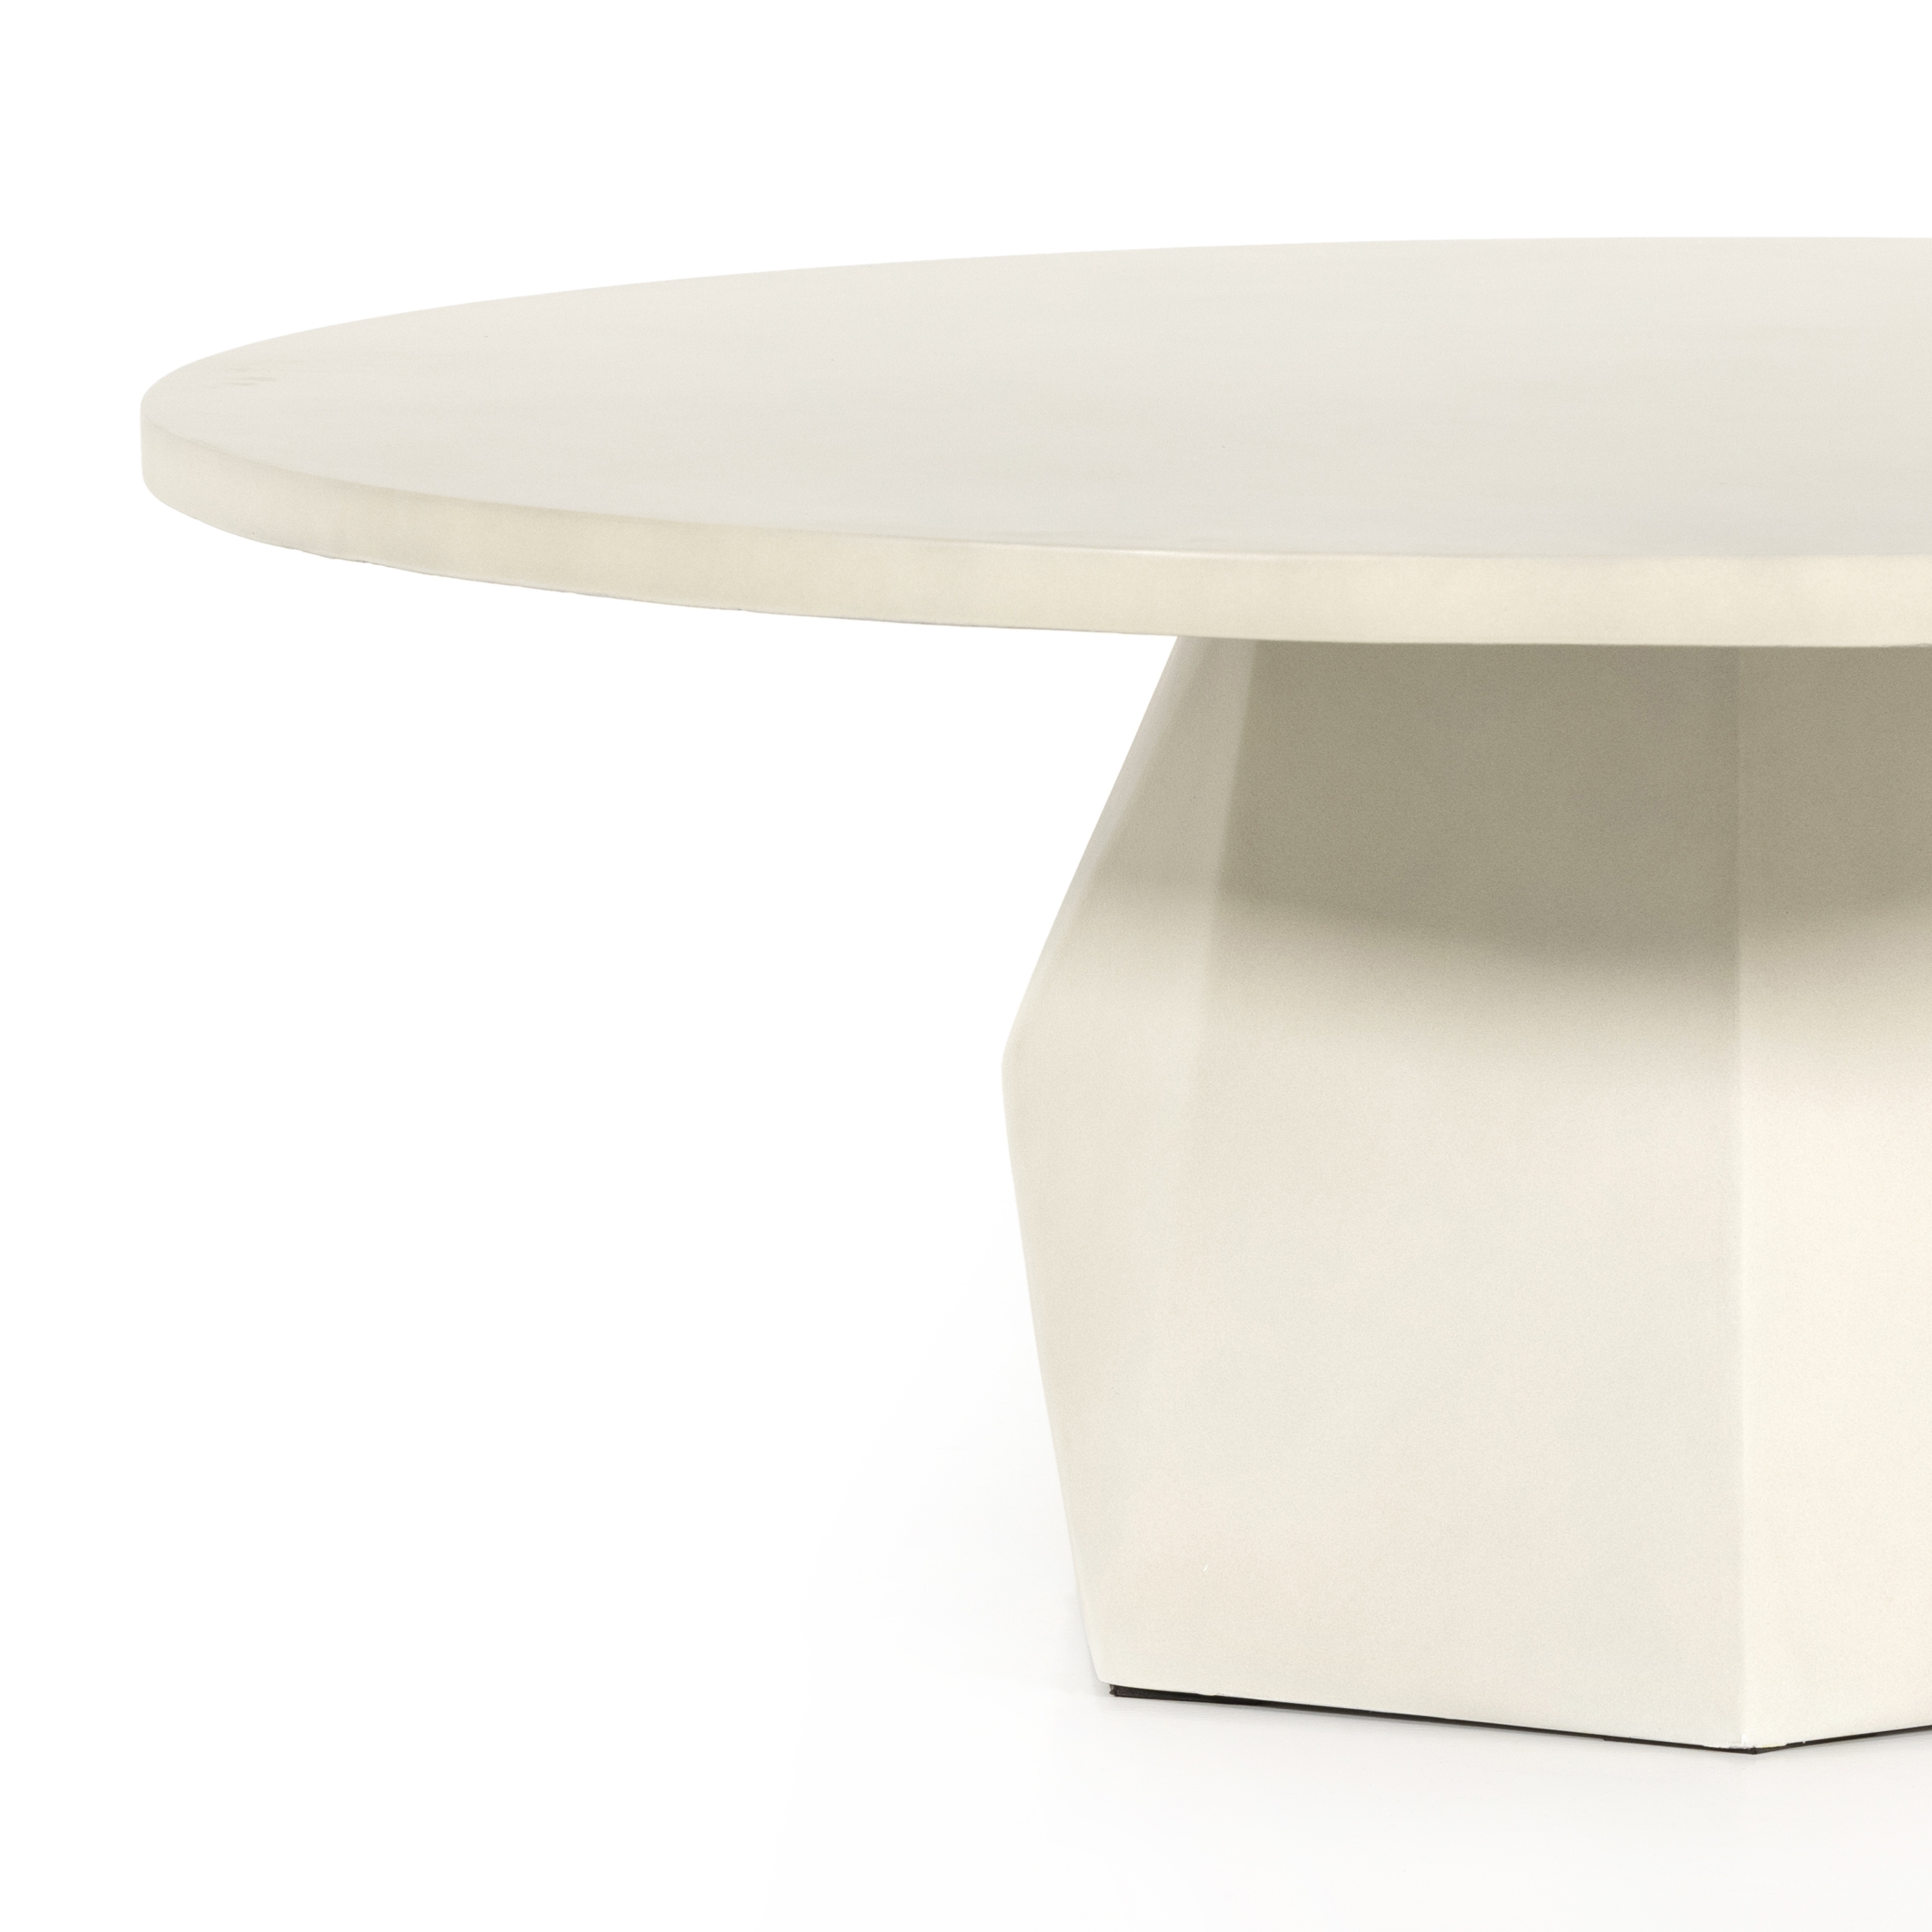 Bowman Outdoor Coffee Table-White Cncrt - Image 8